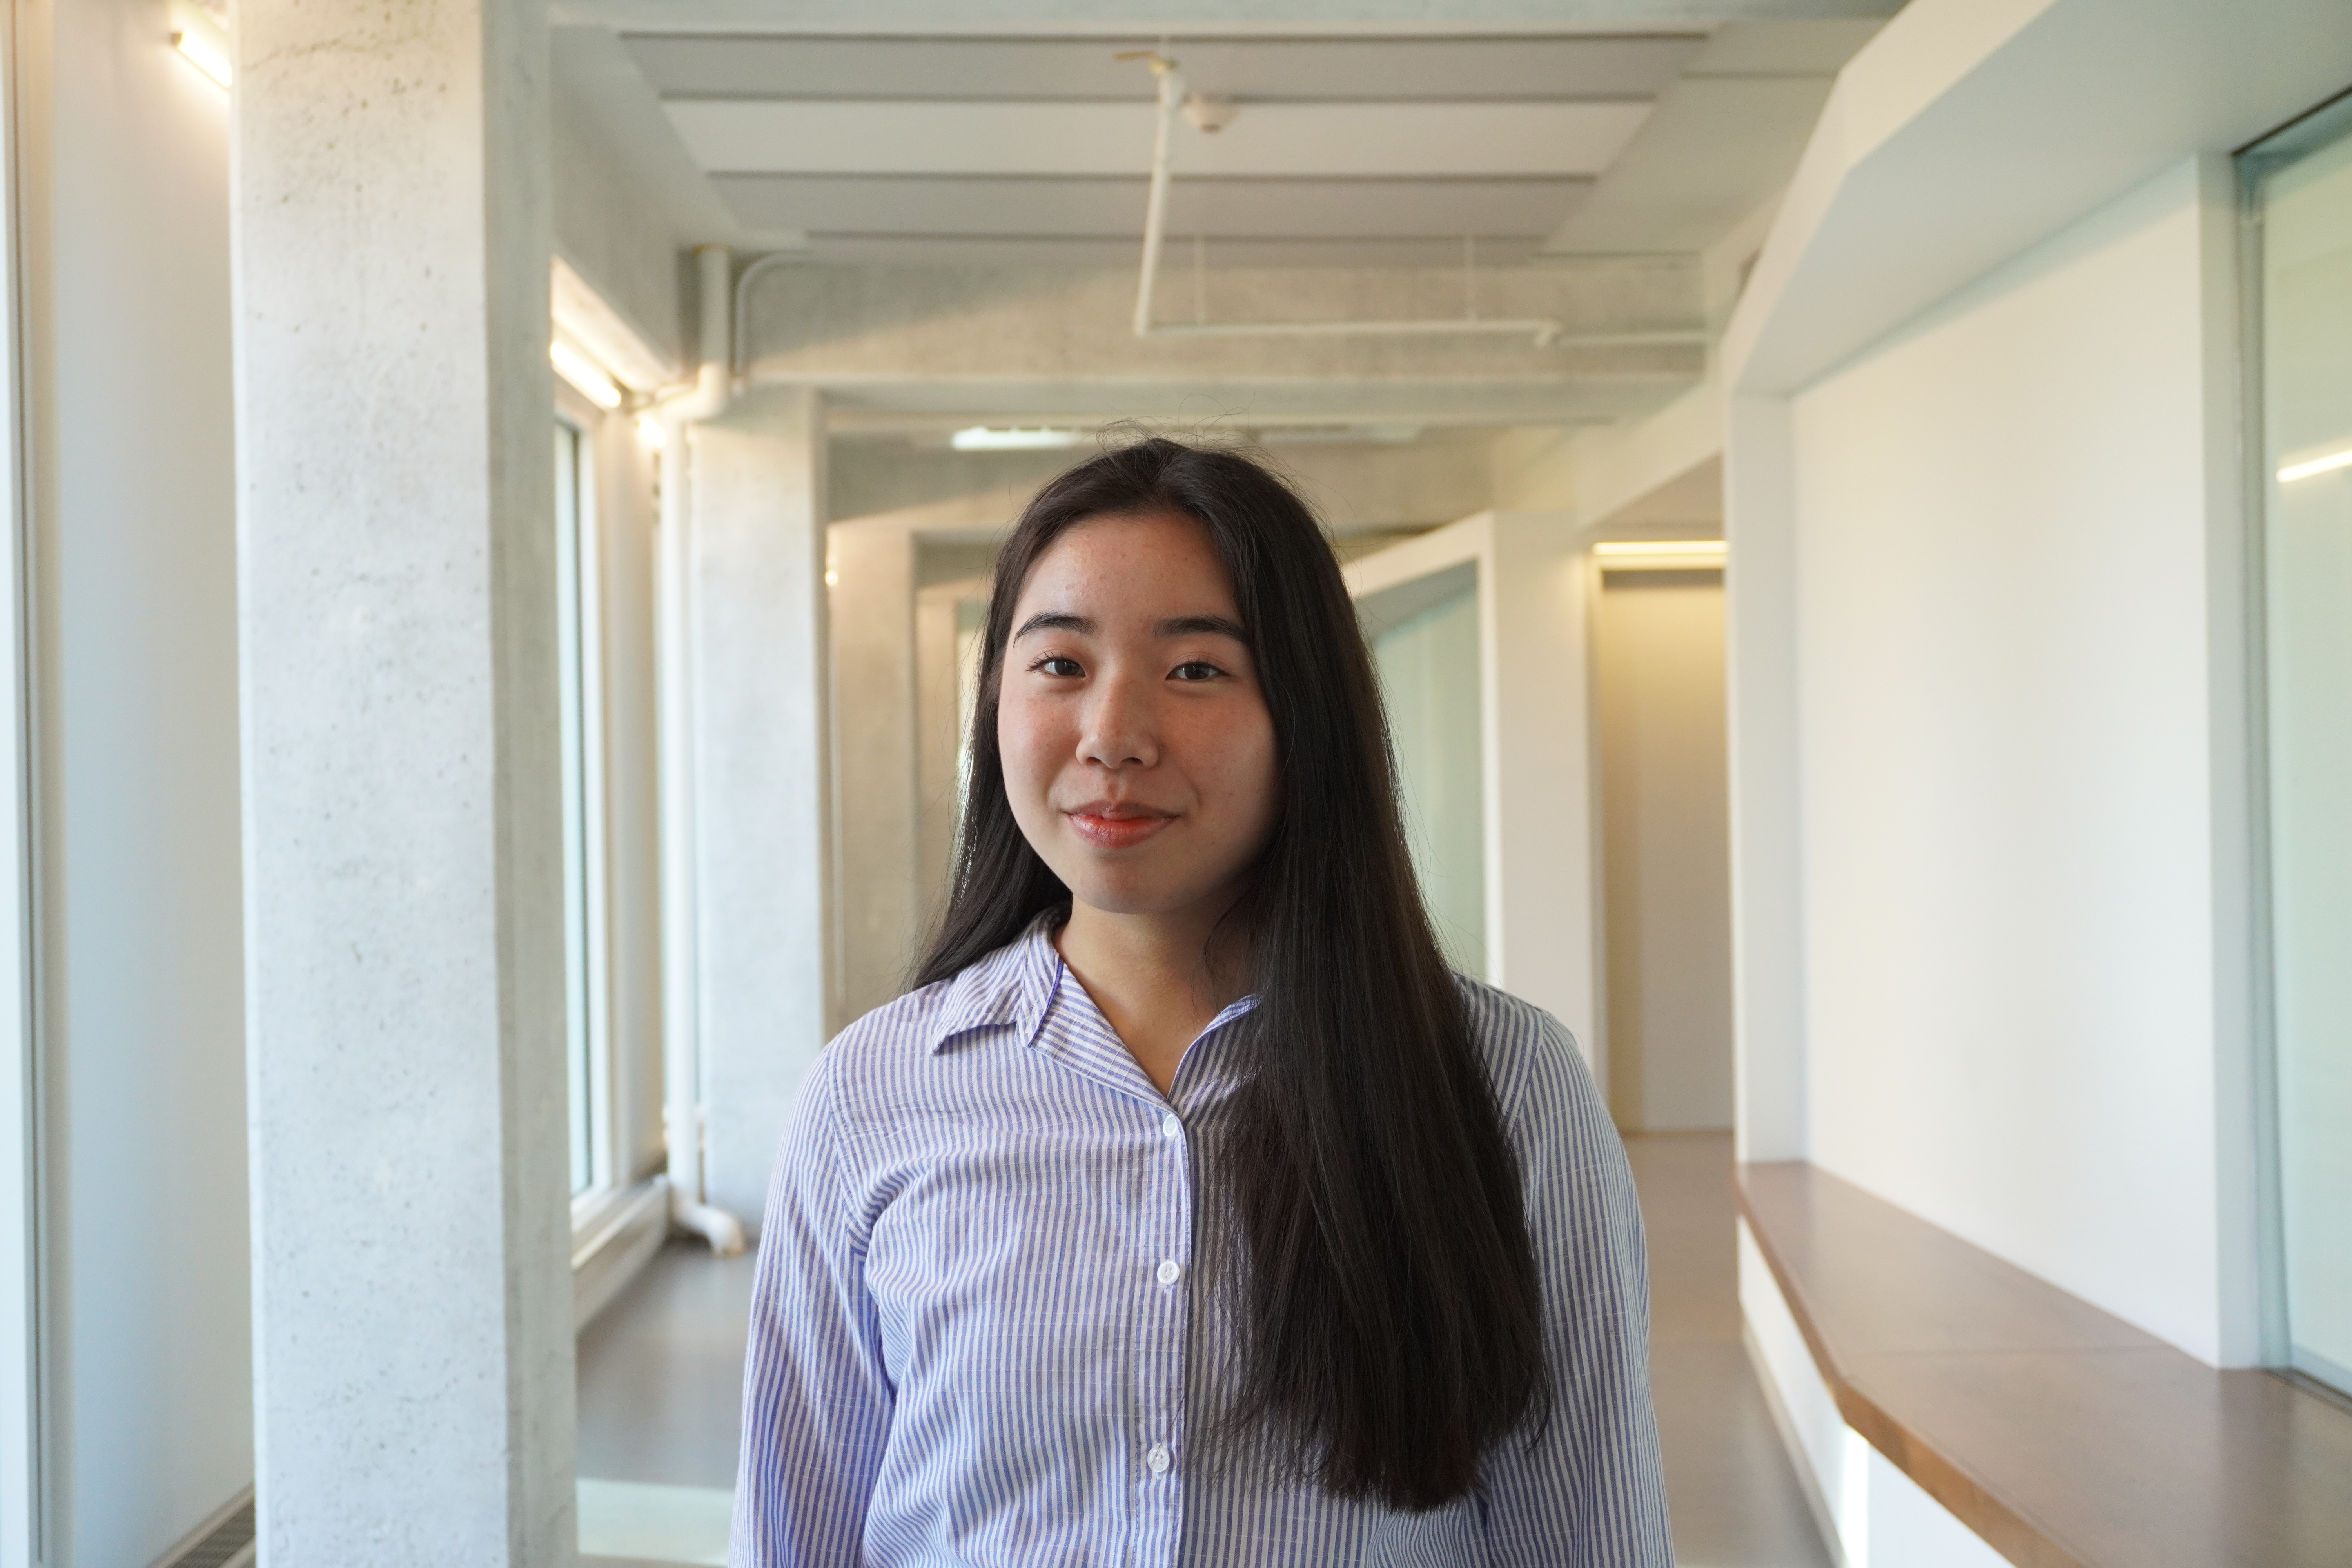 Meet Keri Yamaguchi! <br><br>
              Meet Keri, a sophomore and a member of the Business Subteam. On her free time, 
              Keri enjoys creating art and exploring new places and activities. Her favorite 
              season is winter, as she loves the snow.